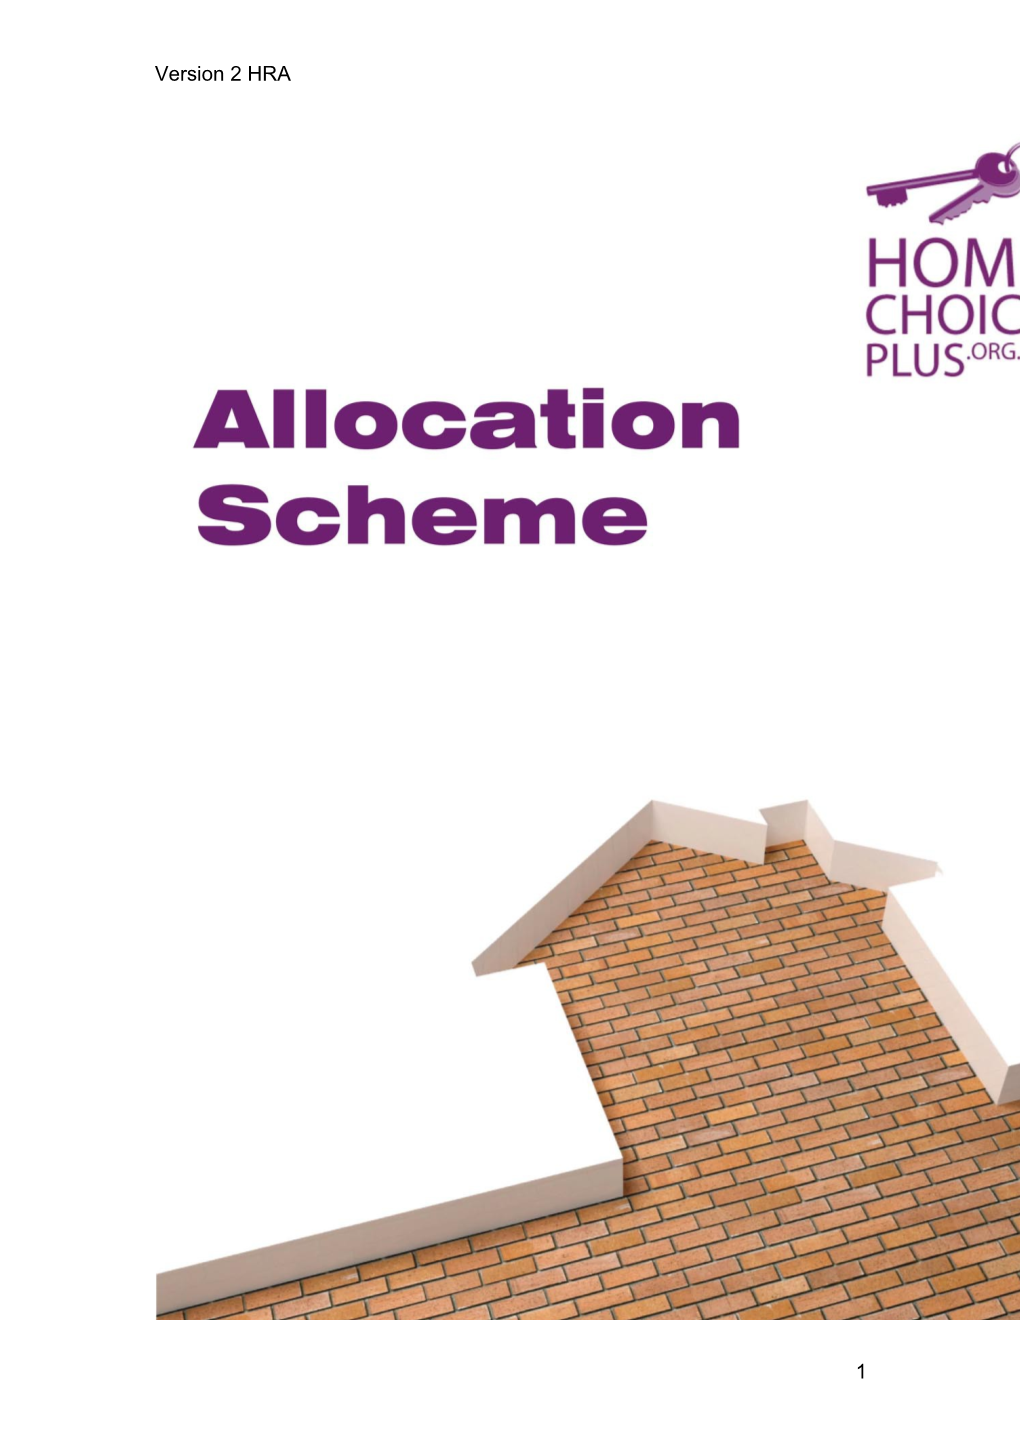 What Are Allocations Under This Scheme?